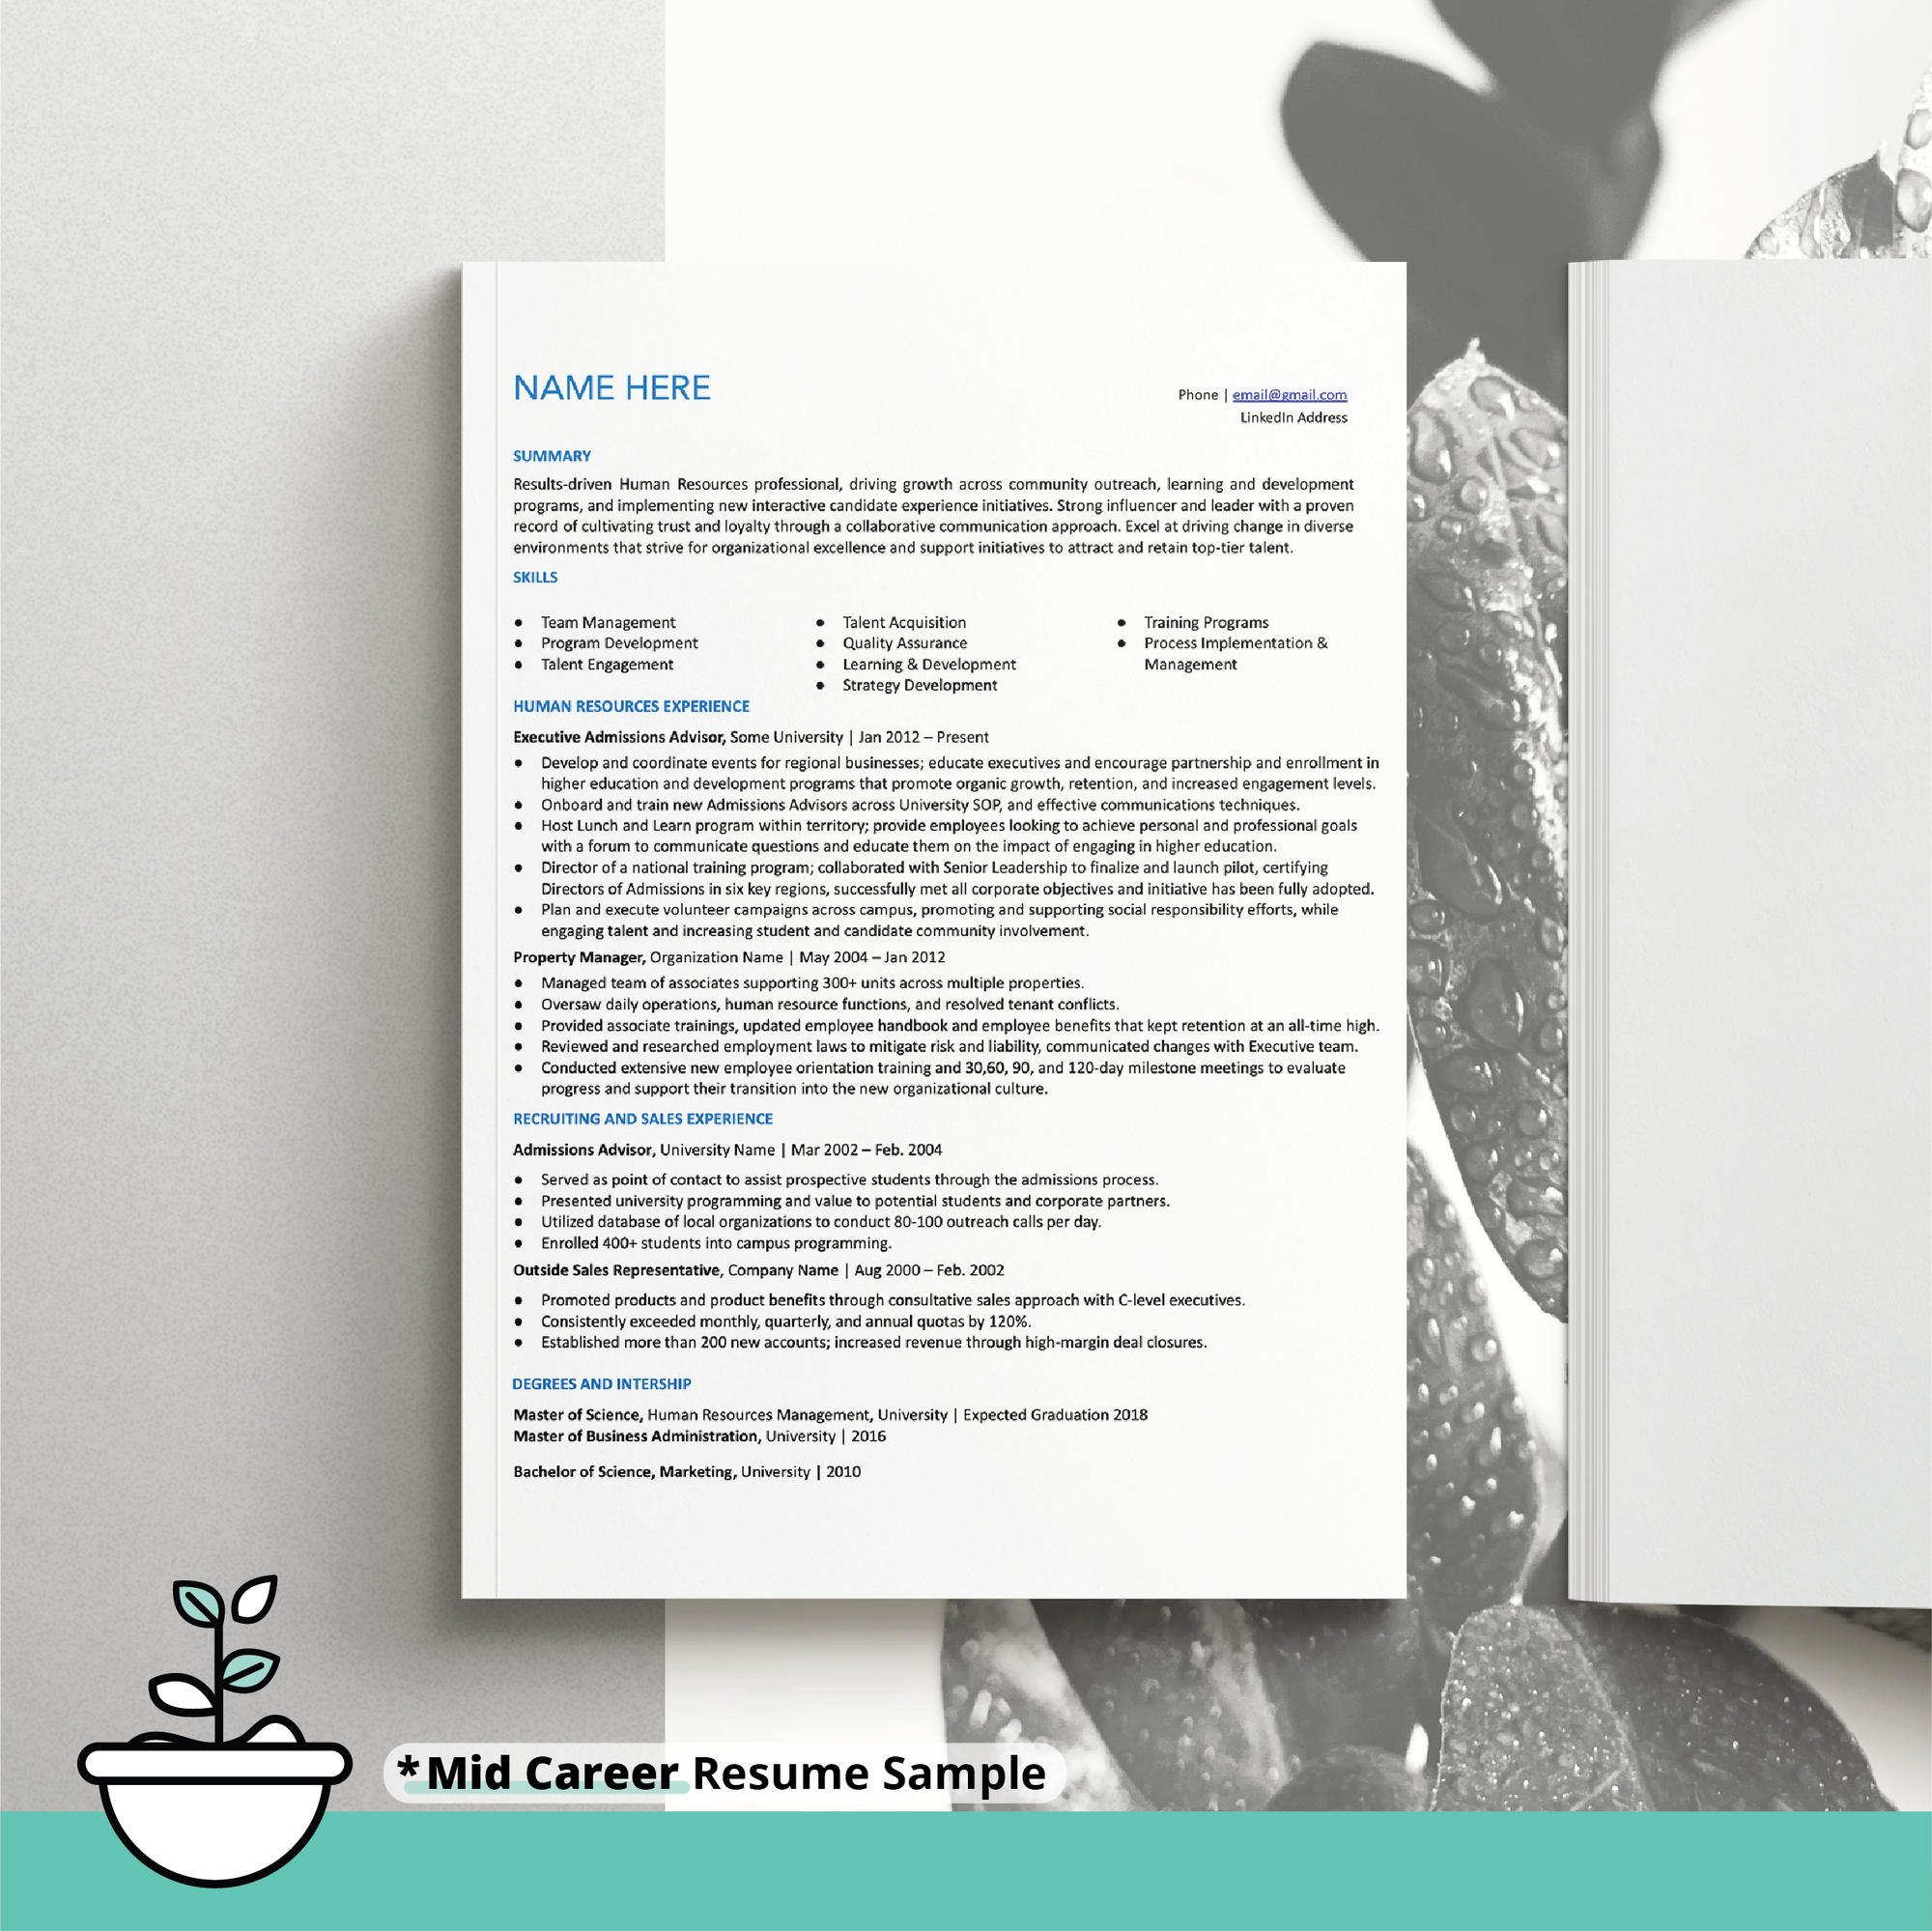 mid level resume on a black and white background with illustrated plant image on top